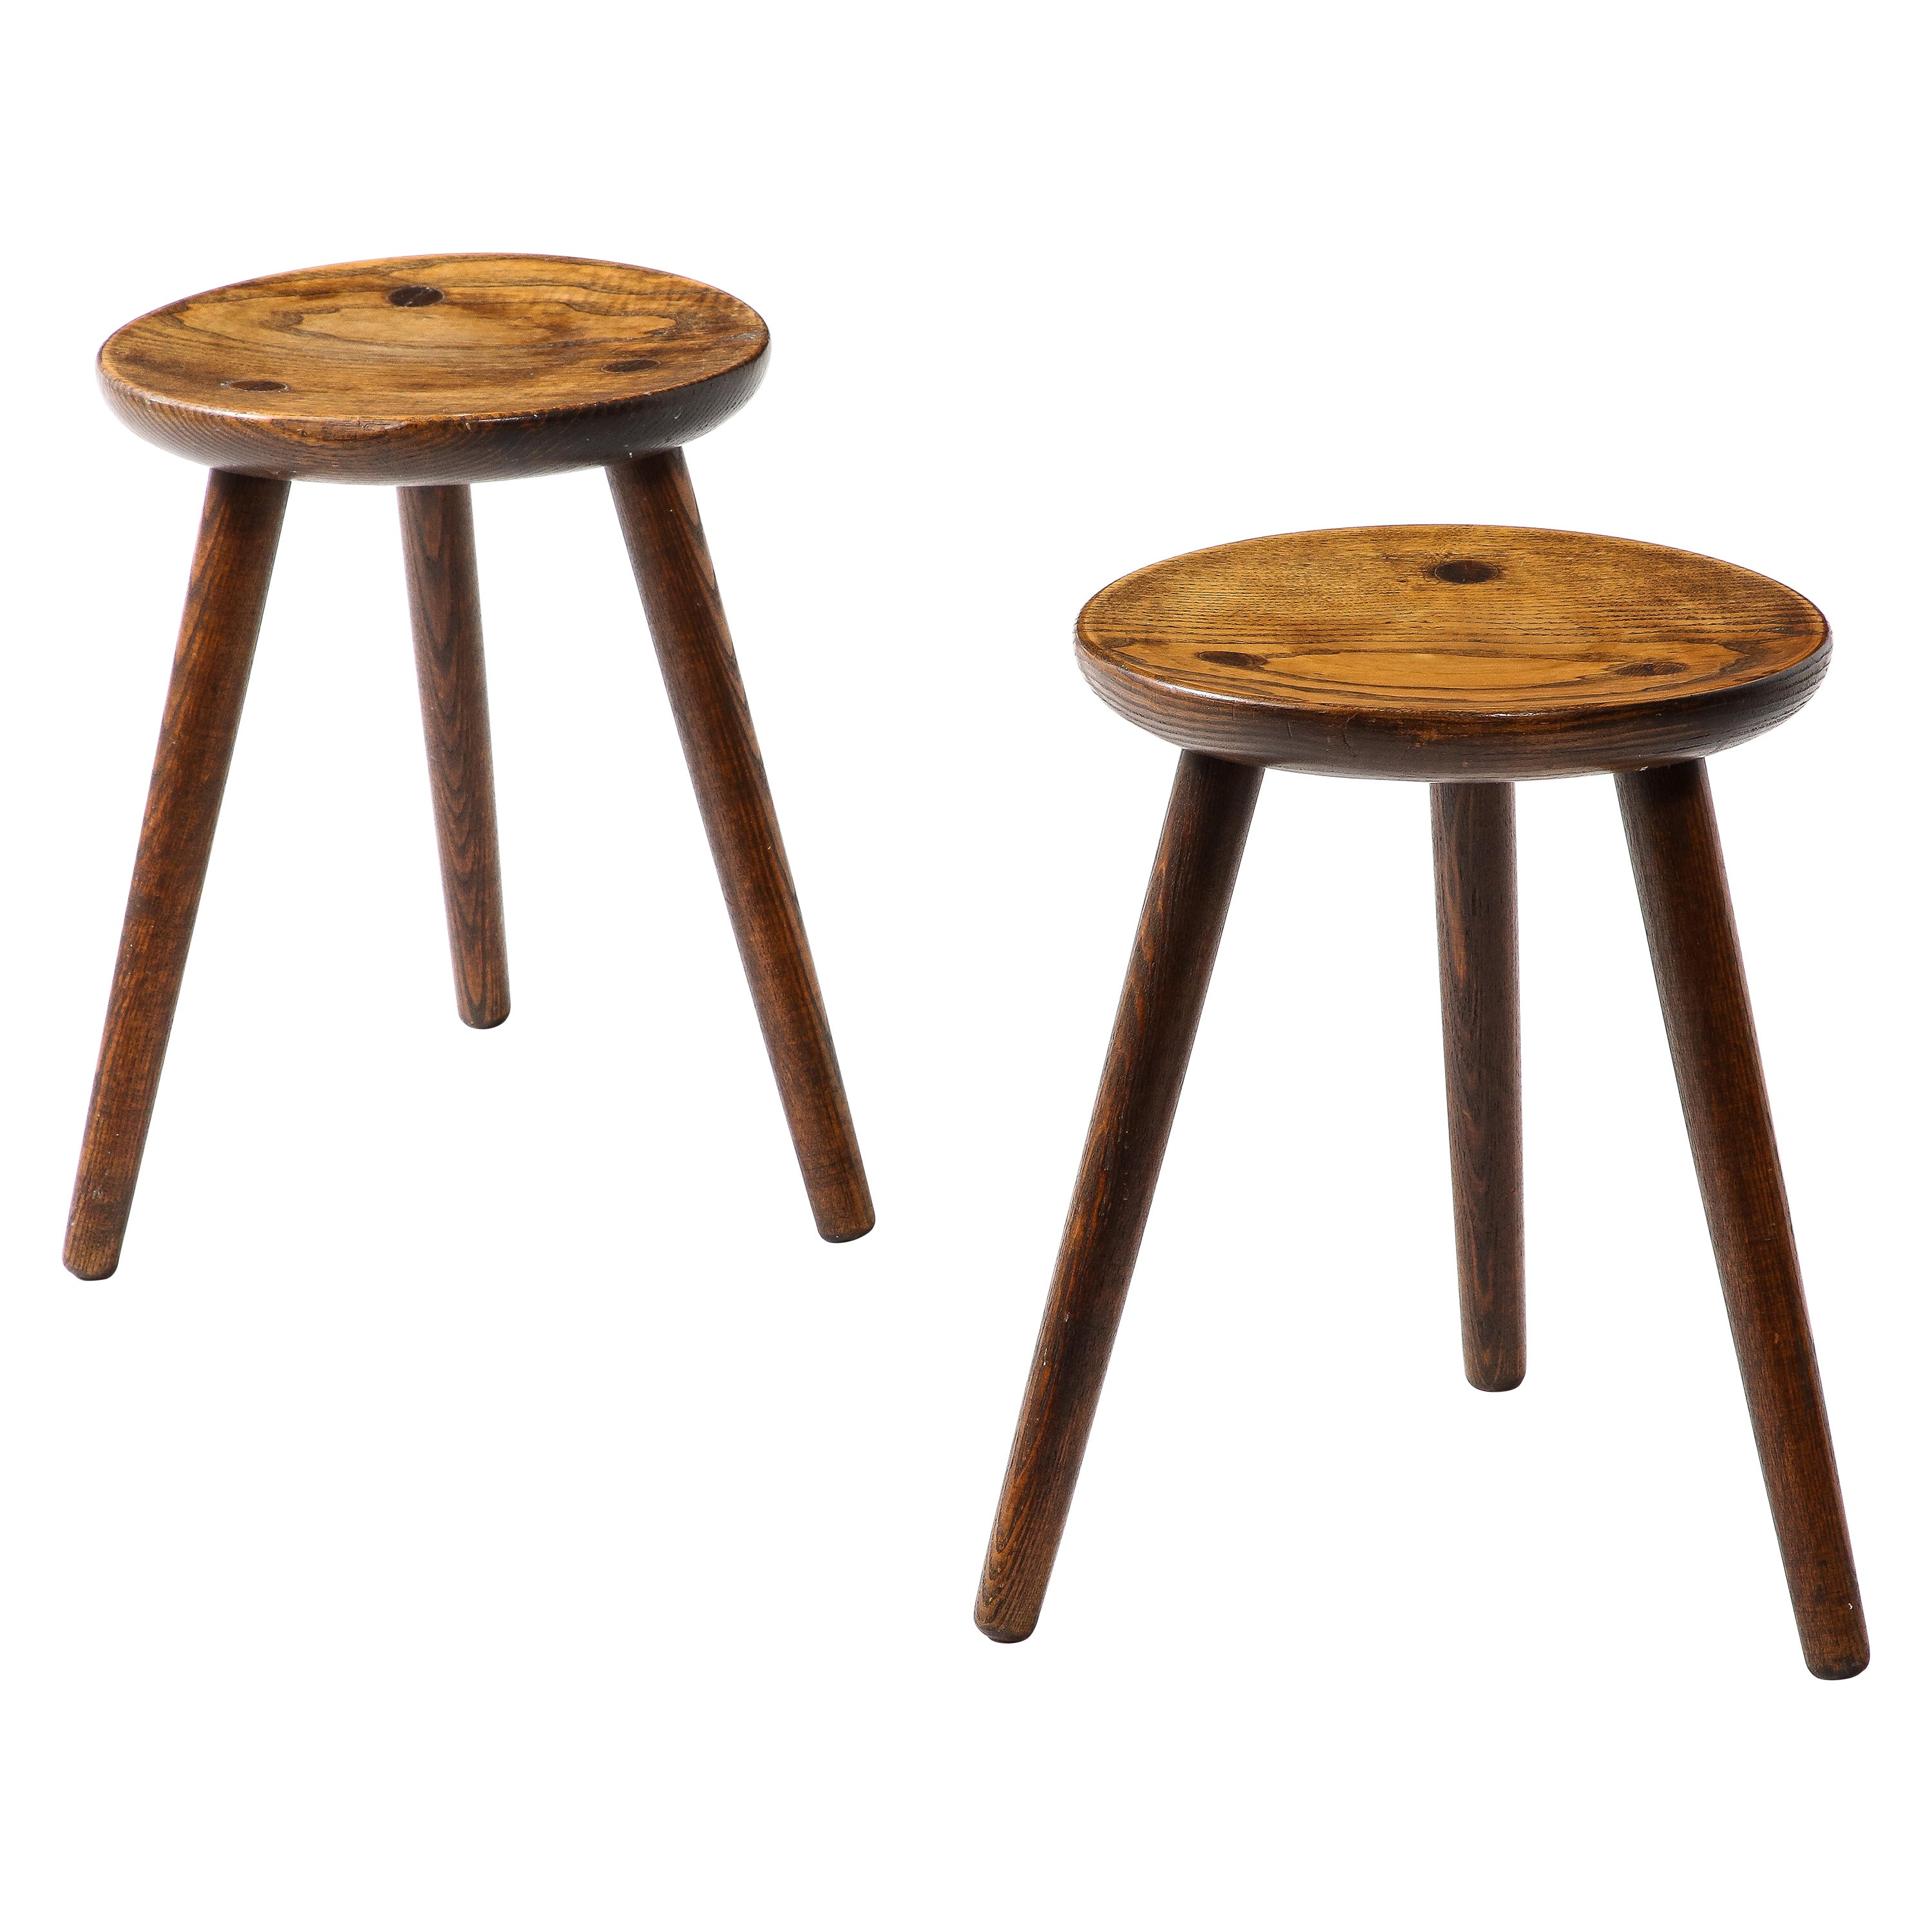 Pair of Tripod Stools in the Manner of Perriand, France 1950s